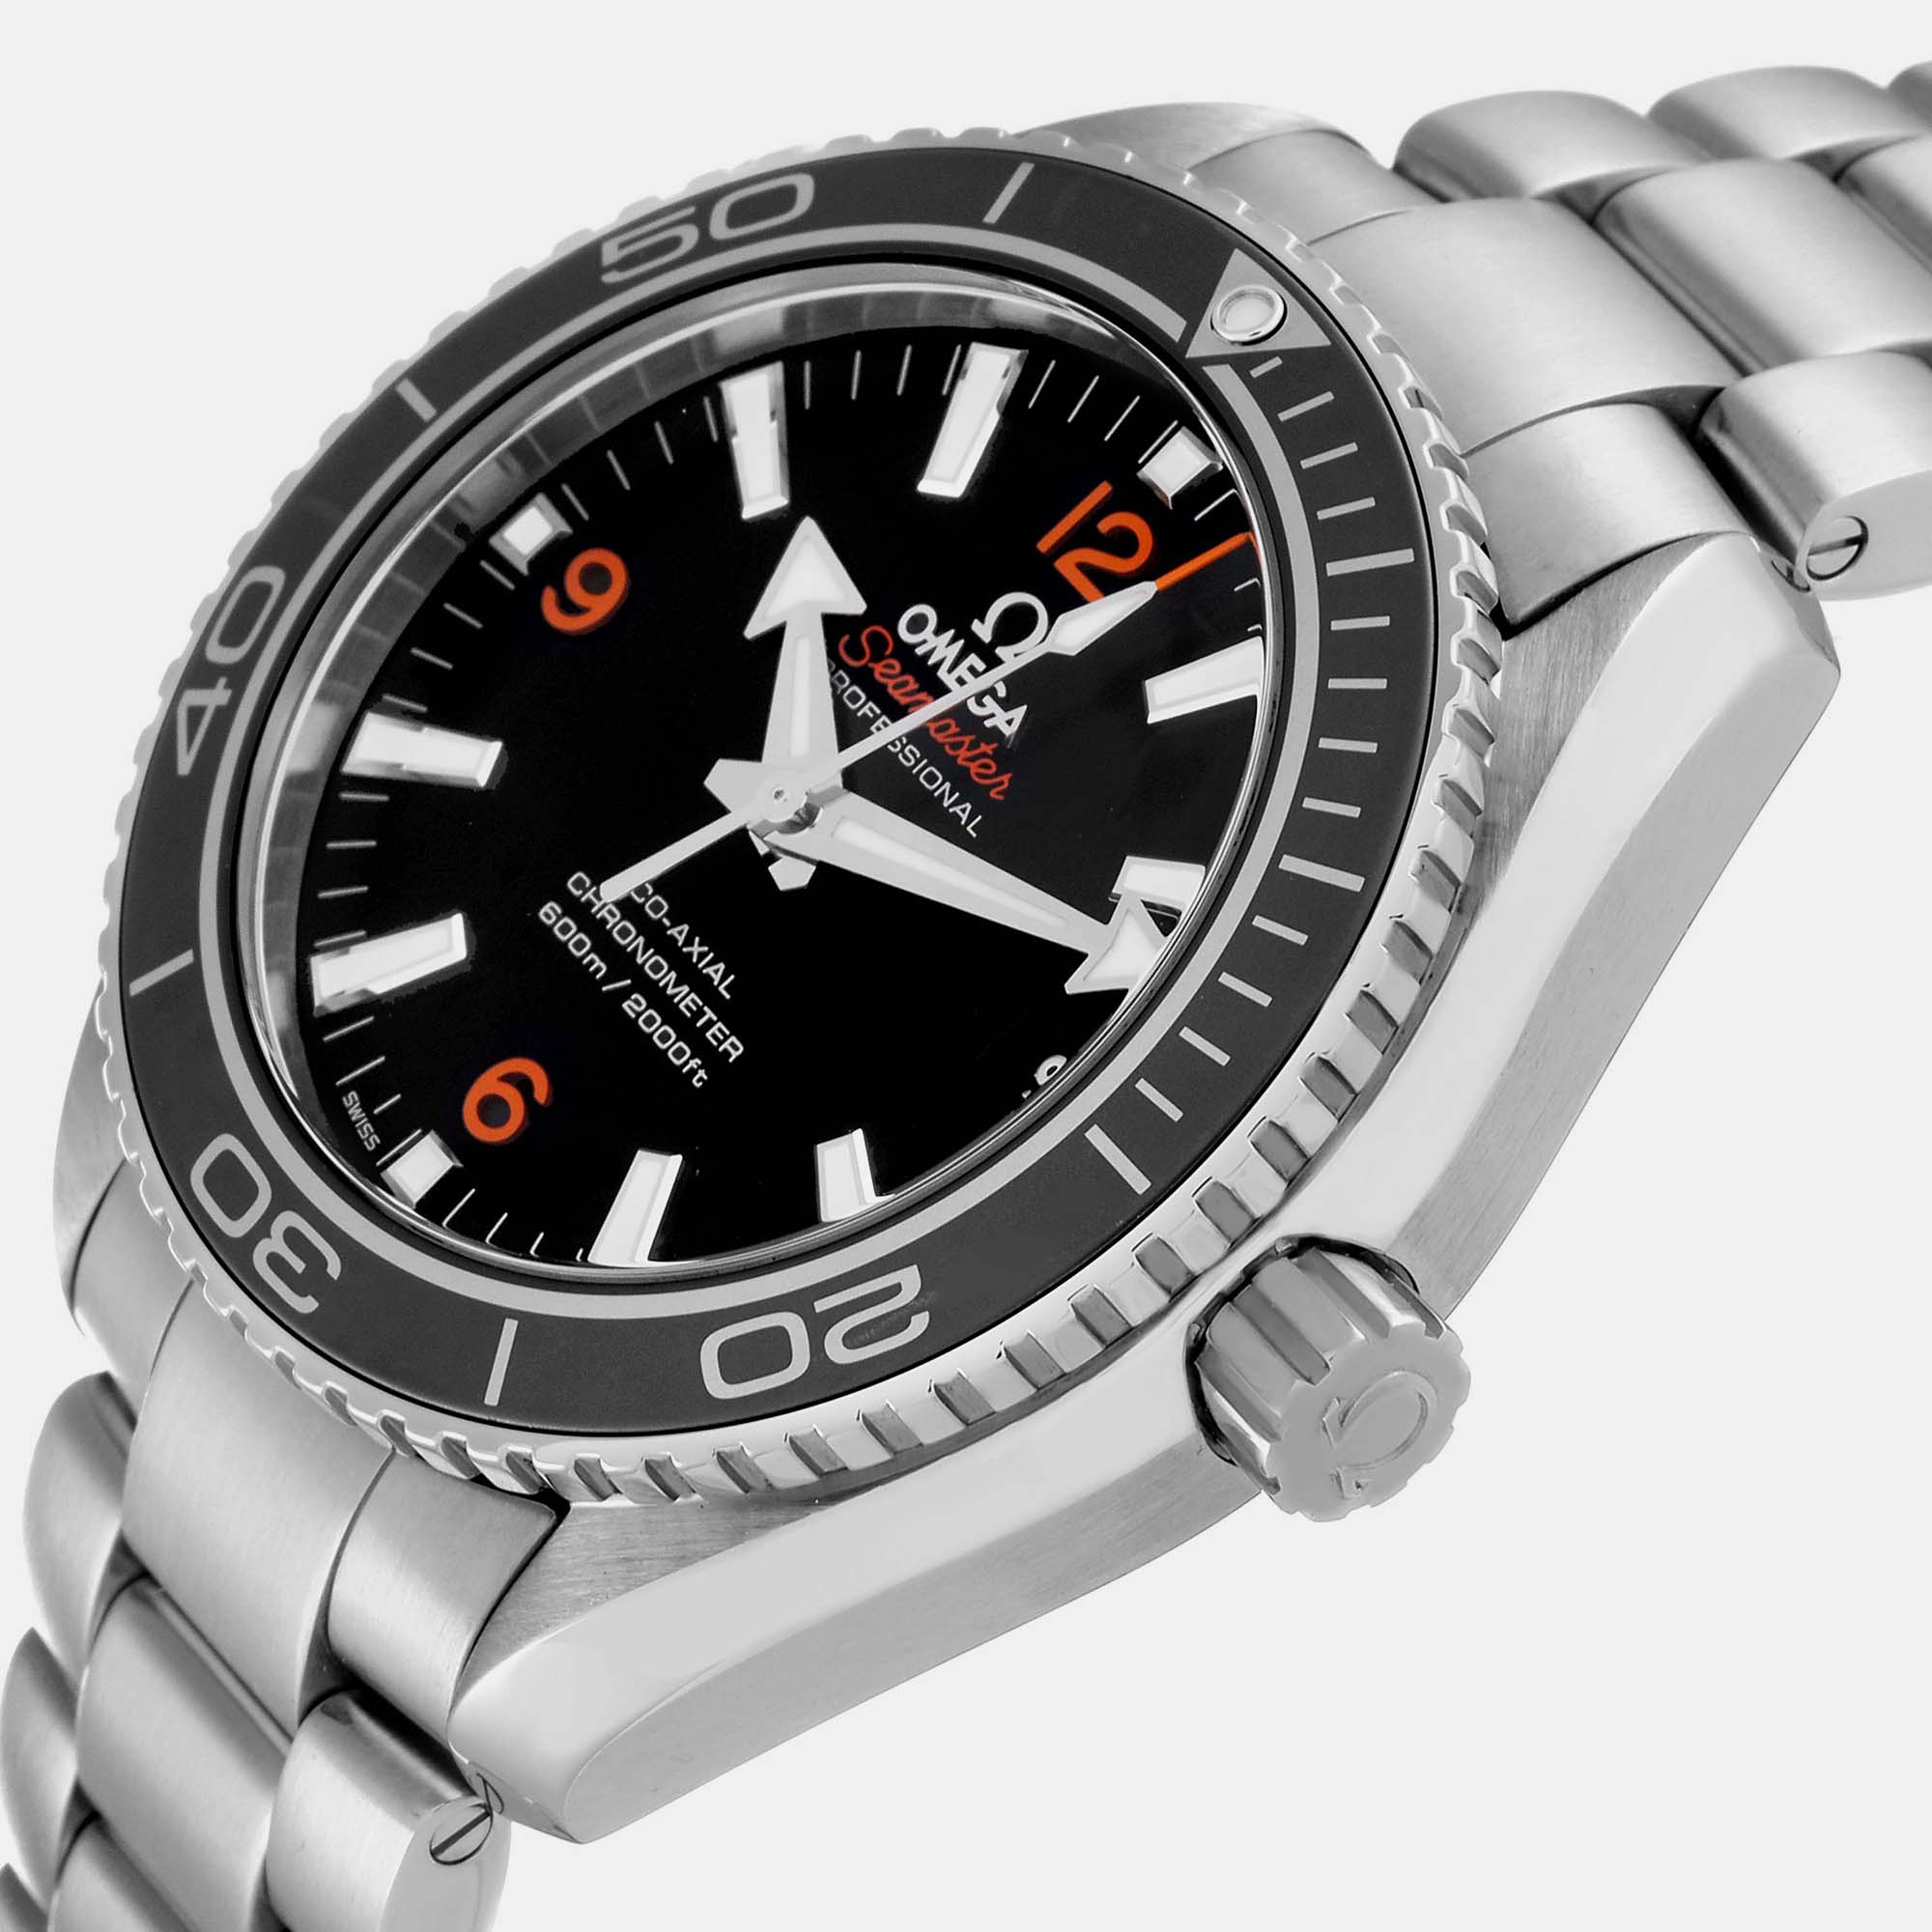 

Omega Black Stainless Steel Seamaster Planet Ocean 232.30.42.21.01.003 Automatic Men's Wristwatch 42 mm